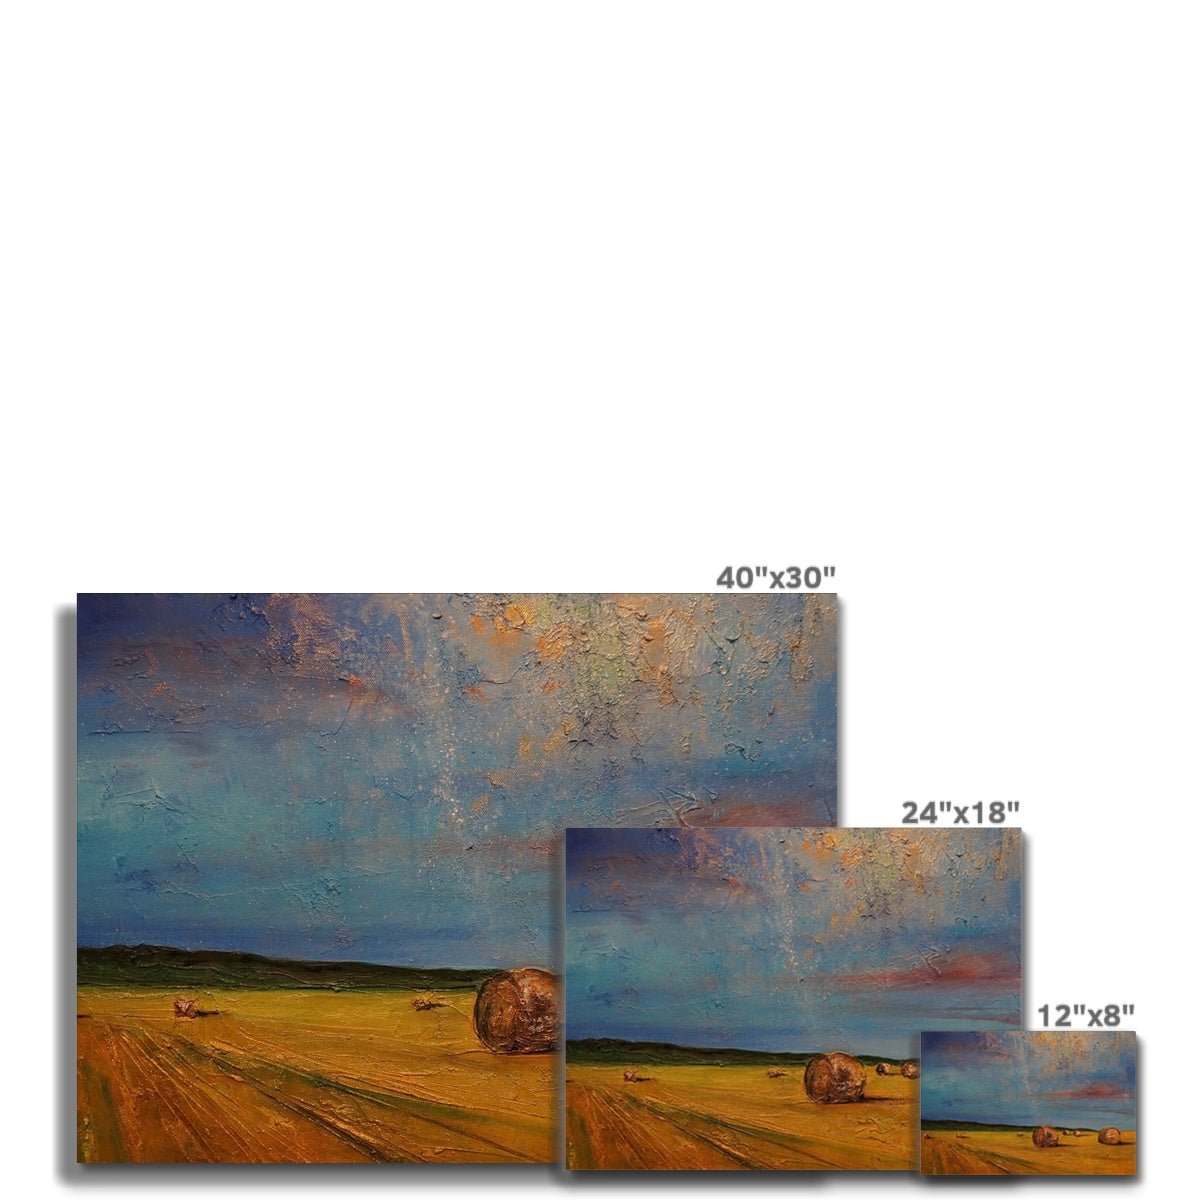 Hay Bales Painting | Canvas-Contemporary Stretched Canvas Prints-Scottish Highlands & Lowlands Art Gallery-Paintings, Prints, Homeware, Art Gifts From Scotland By Scottish Artist Kevin Hunter